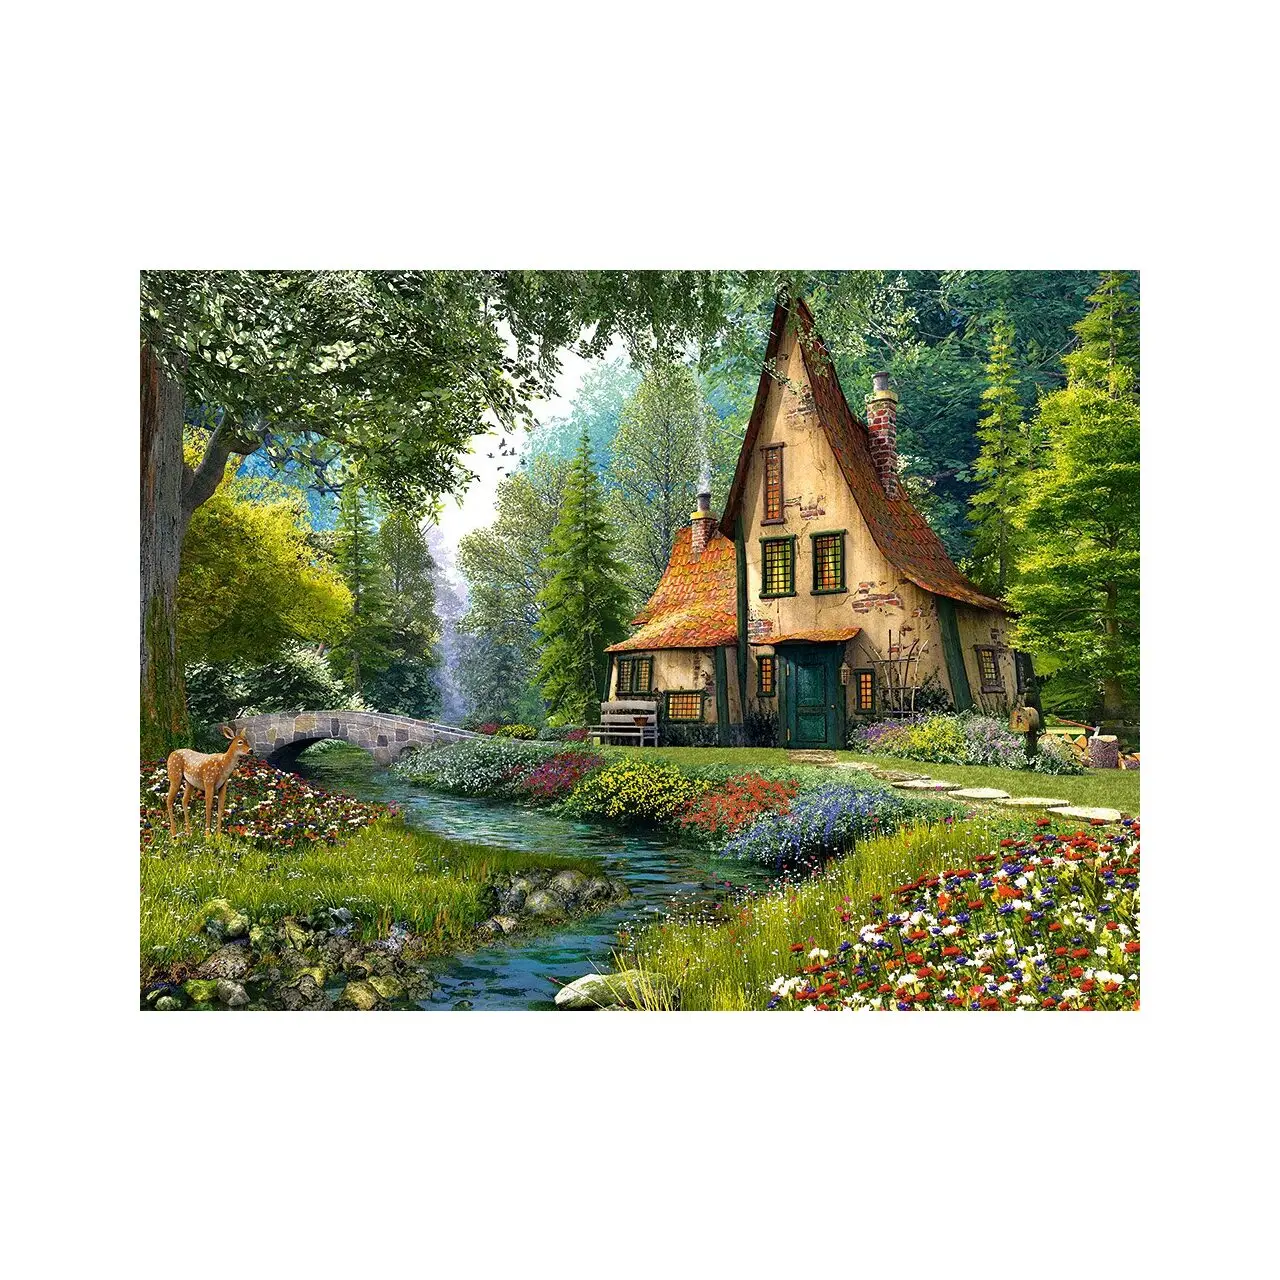 Toadstool Cottage Puzzle